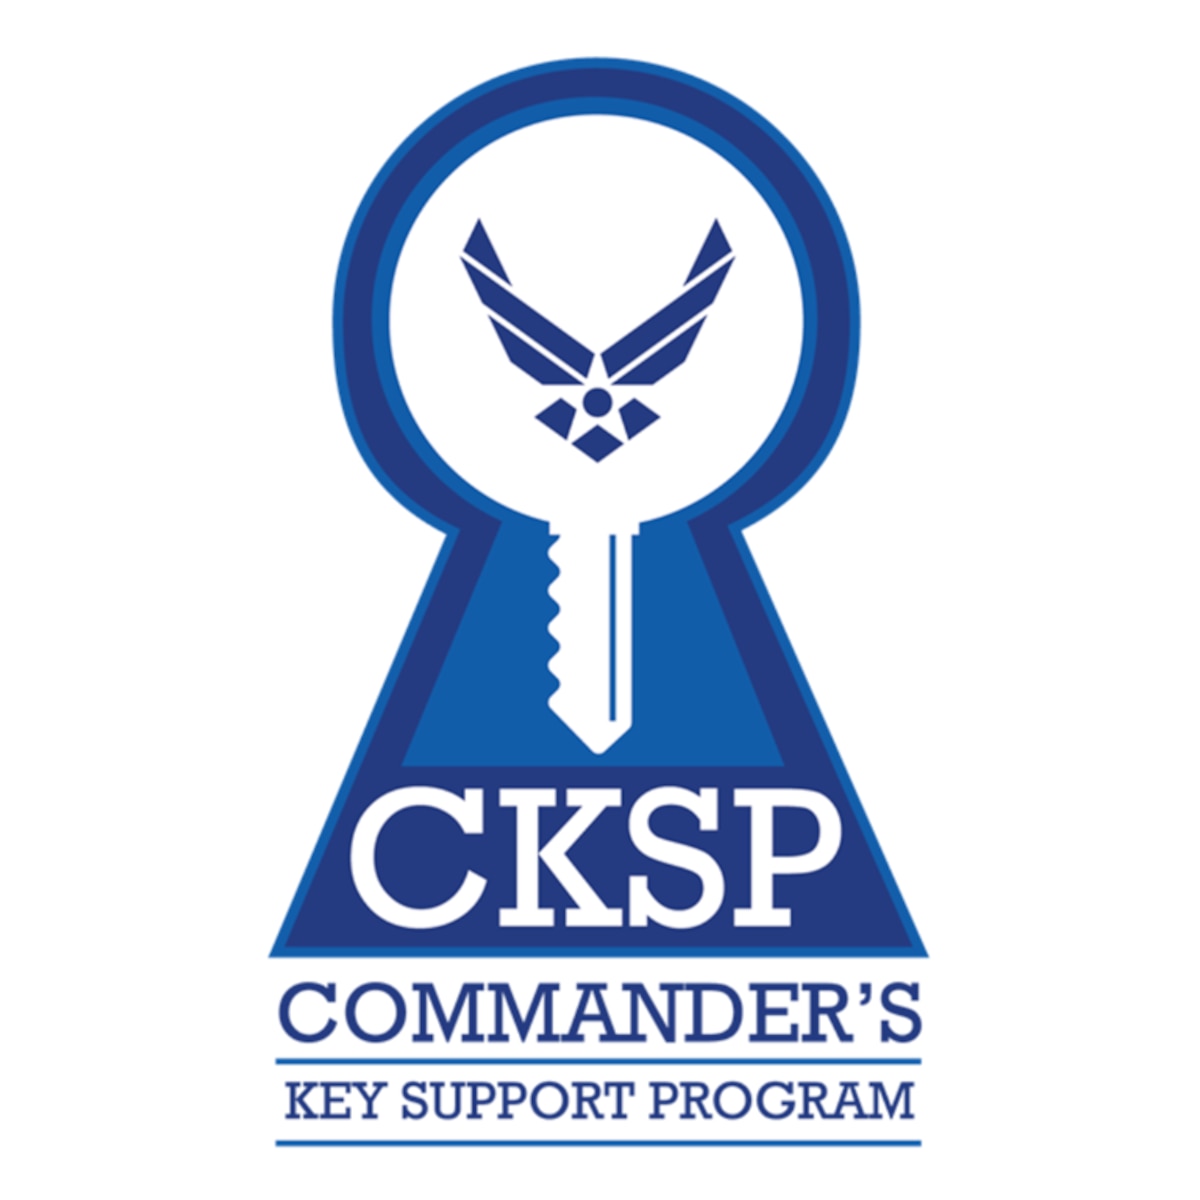 The Key Spouse Program has been rebranded as the Commander's Key Support Program and identifies program volunteers as Key Support Liaisons.